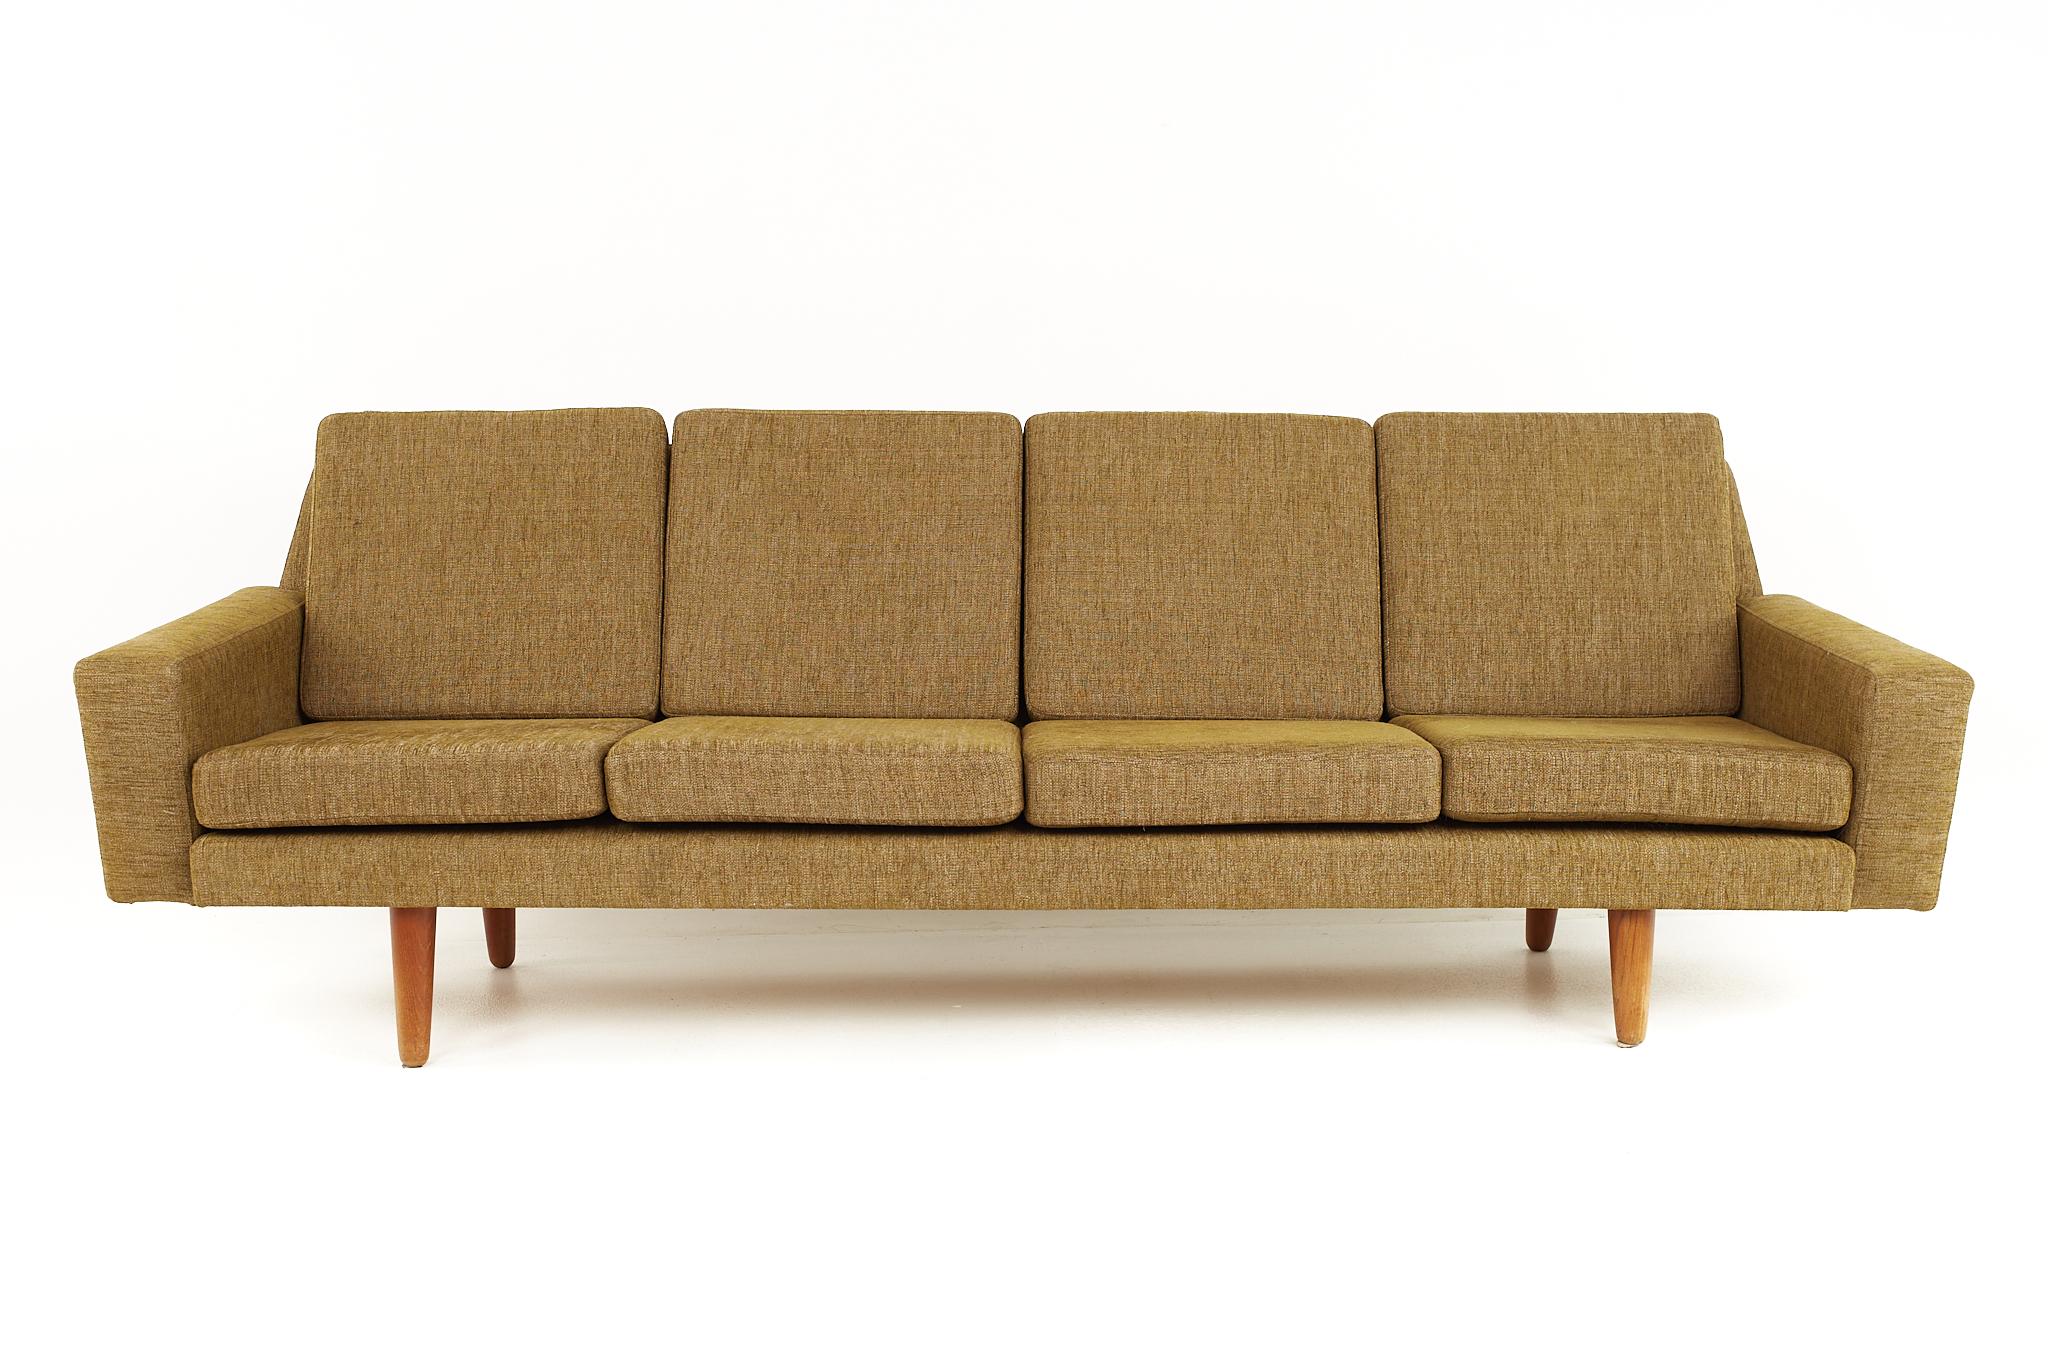 Illum Wikkelso style mid-century danish teak sofa

This sofa measures: 90 wide x 27 deep x 32 inches high, with a seat height of 16 and arm height of 21 inches

All pieces of furniture can be had in what we call restored vintage condition. That